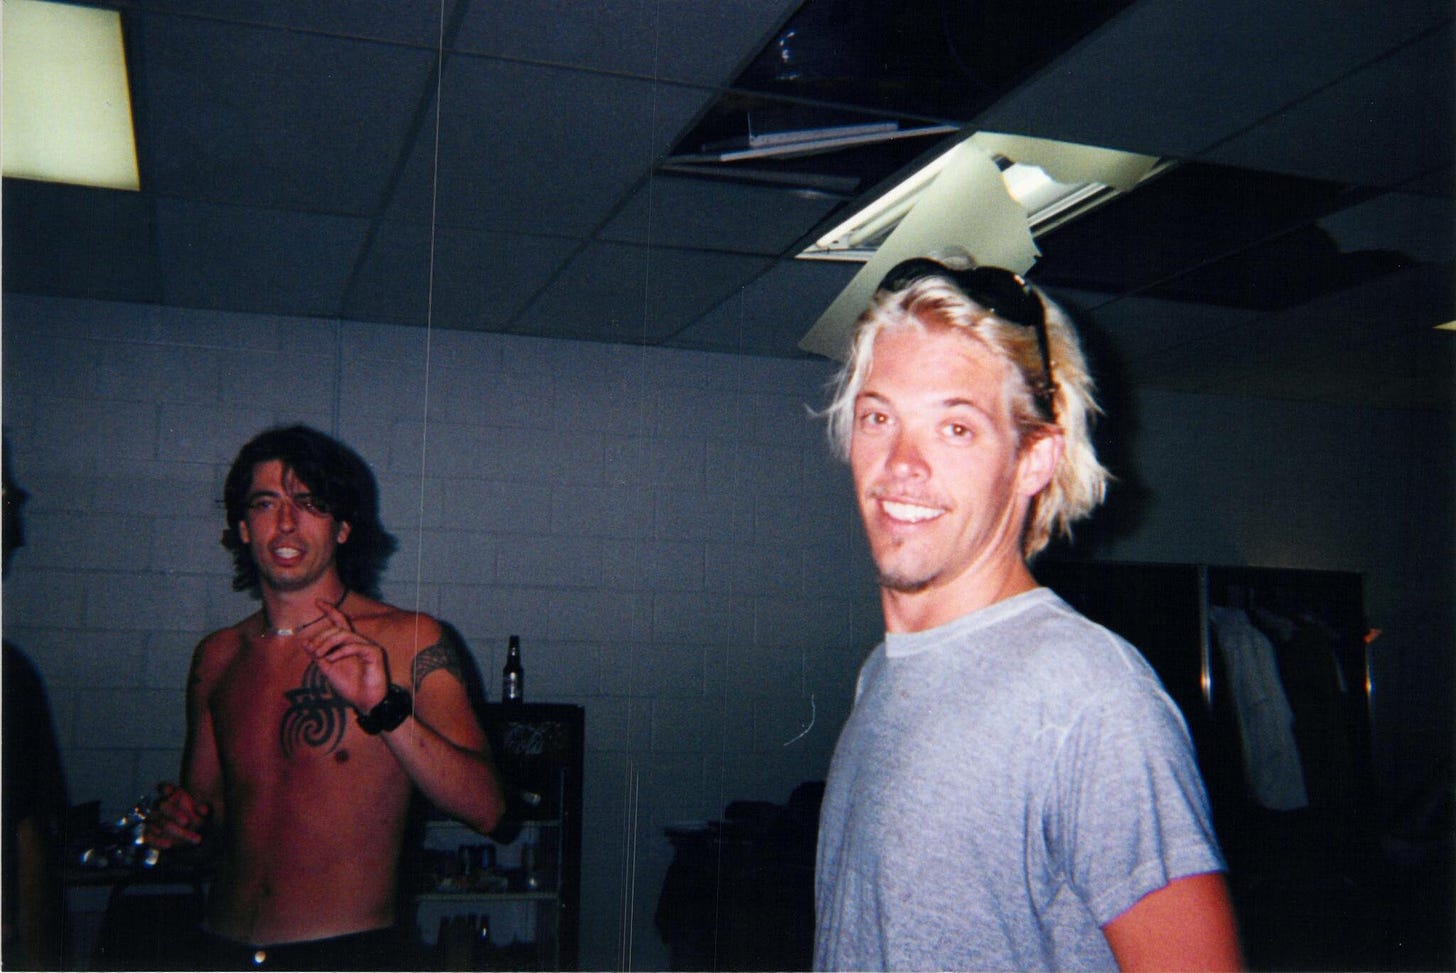 Taylor Hawkins Hair on Twitter: "no needles but damage done. St Louis Red  Hot Chili Peppers tour. #gooch #young #weirdxmaspresent  http://t.co/NJ2V6P2xbS" / Twitter